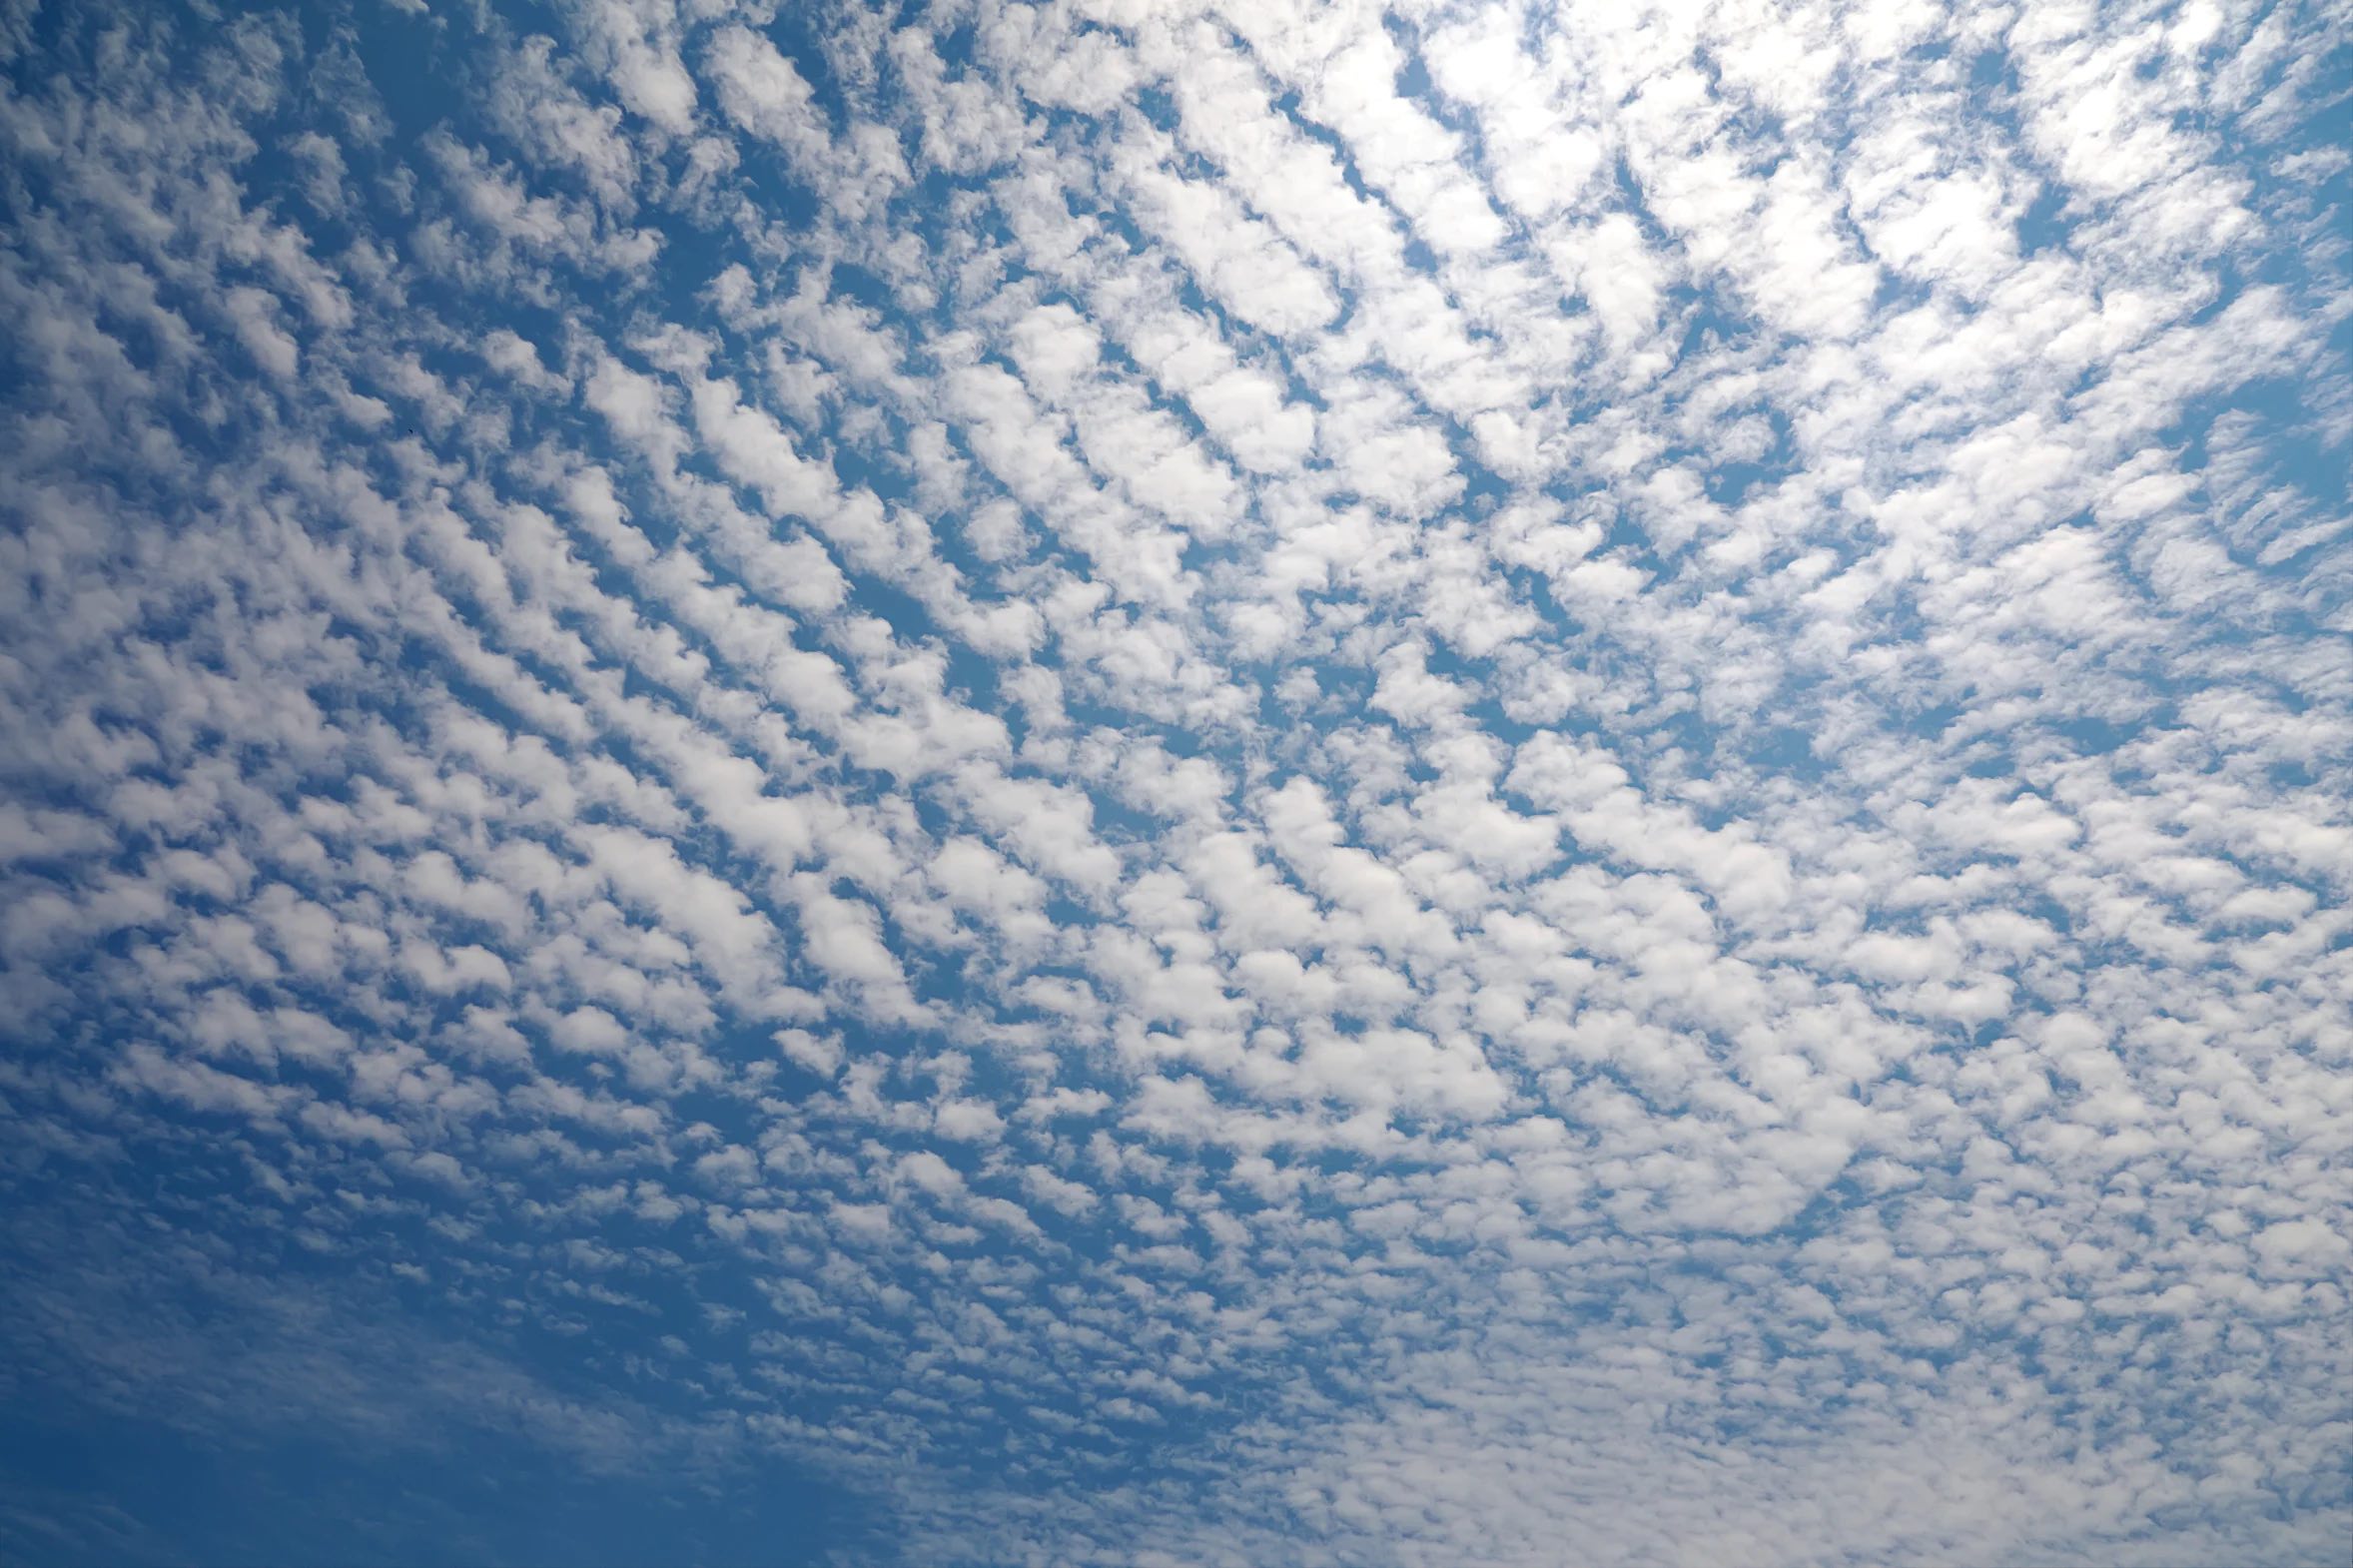 a formation of long, scalloped clouds against a blue sky